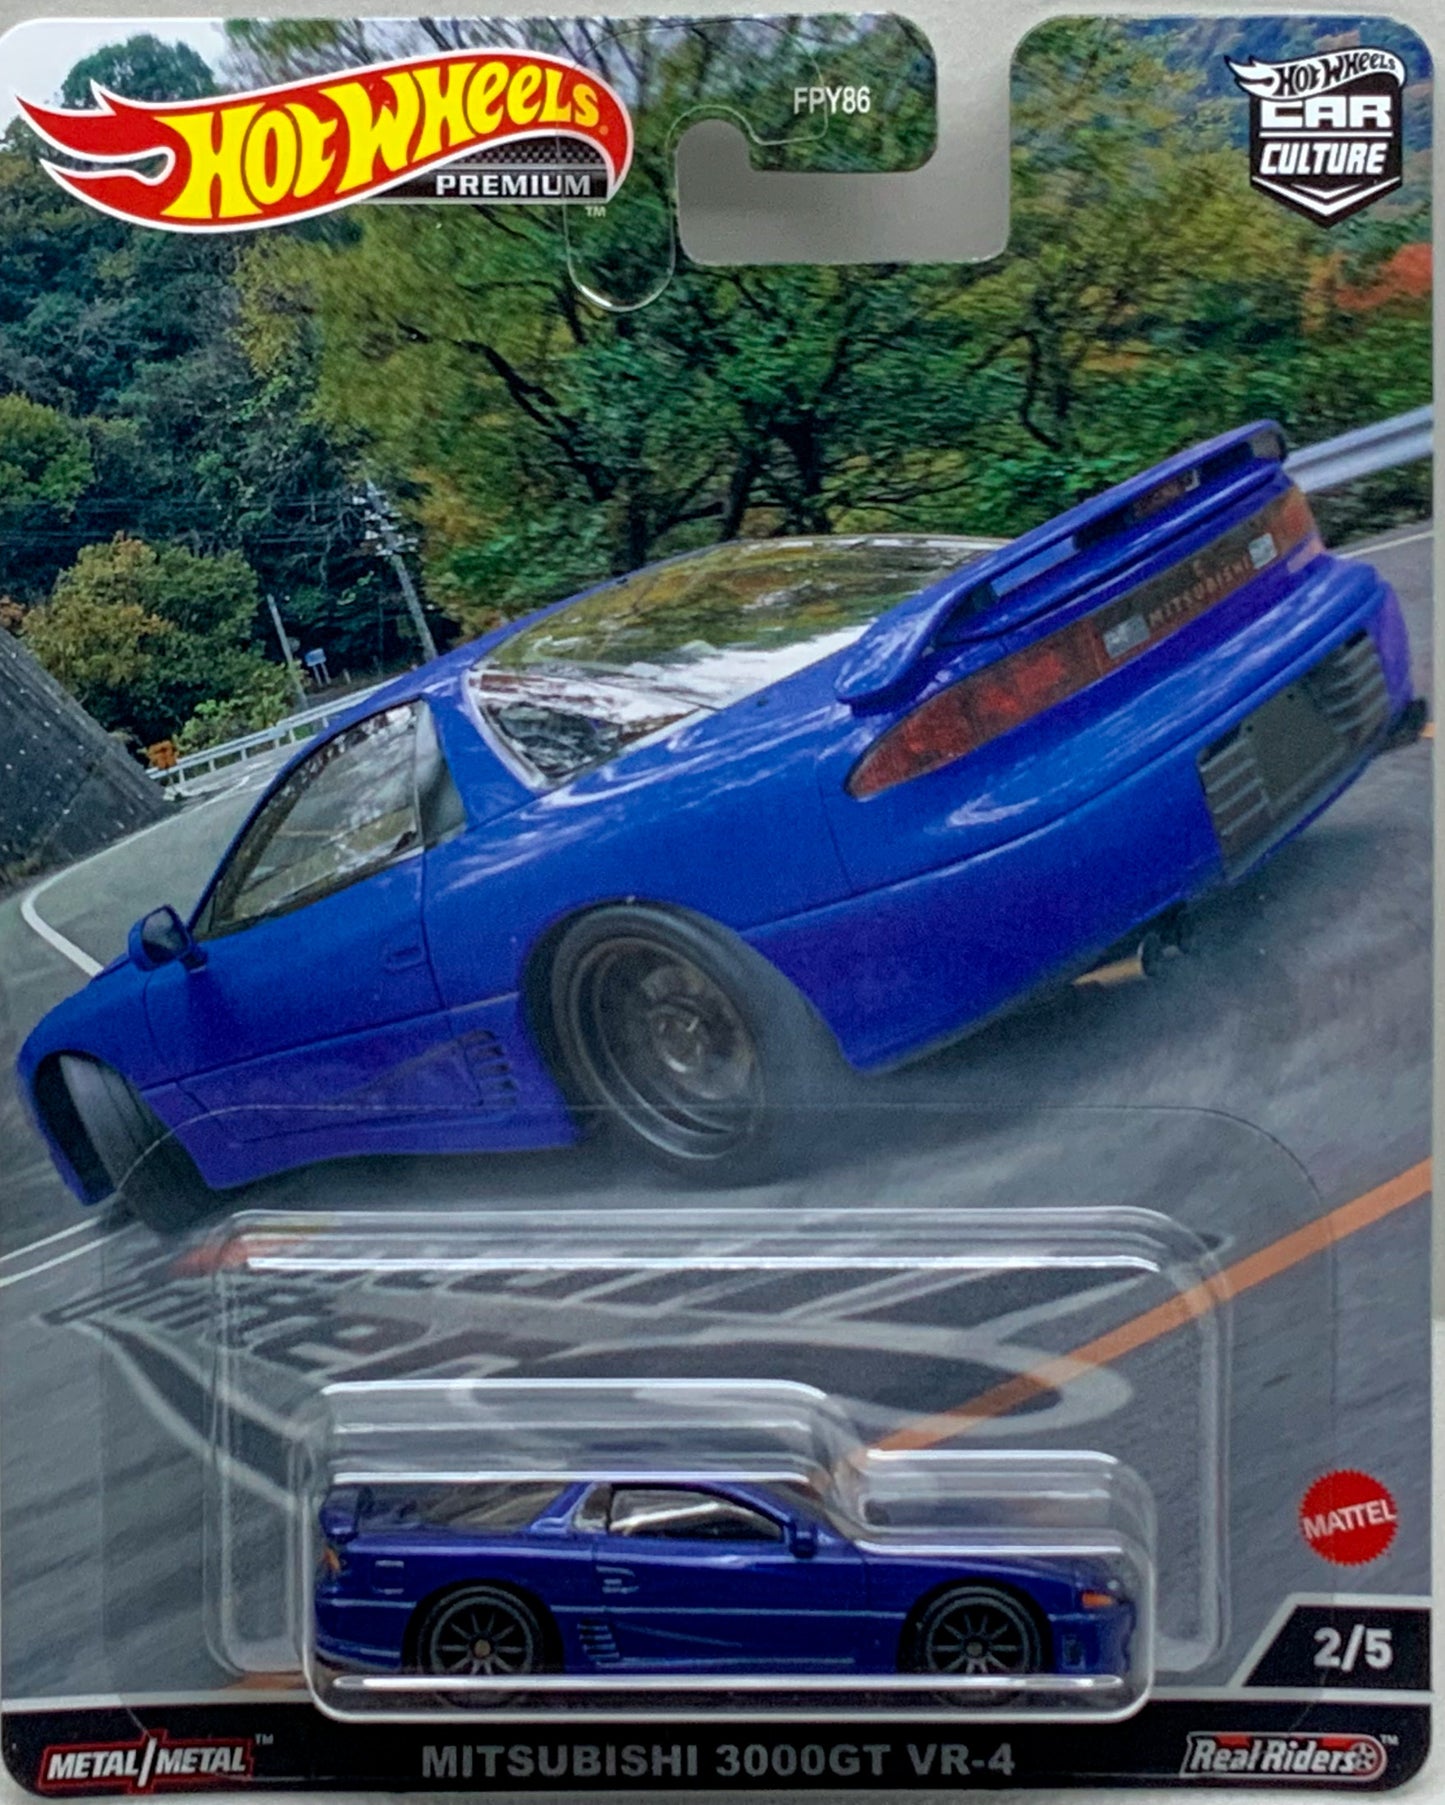 Buy at Tatoyshop.com Hot Wheels Car Culture Mitsubishi 3000GT VR-4 Number 2 from the set of 5 Mountain Drifters Series Premium Real Riders Metal Mattel FPY86 Shop Now